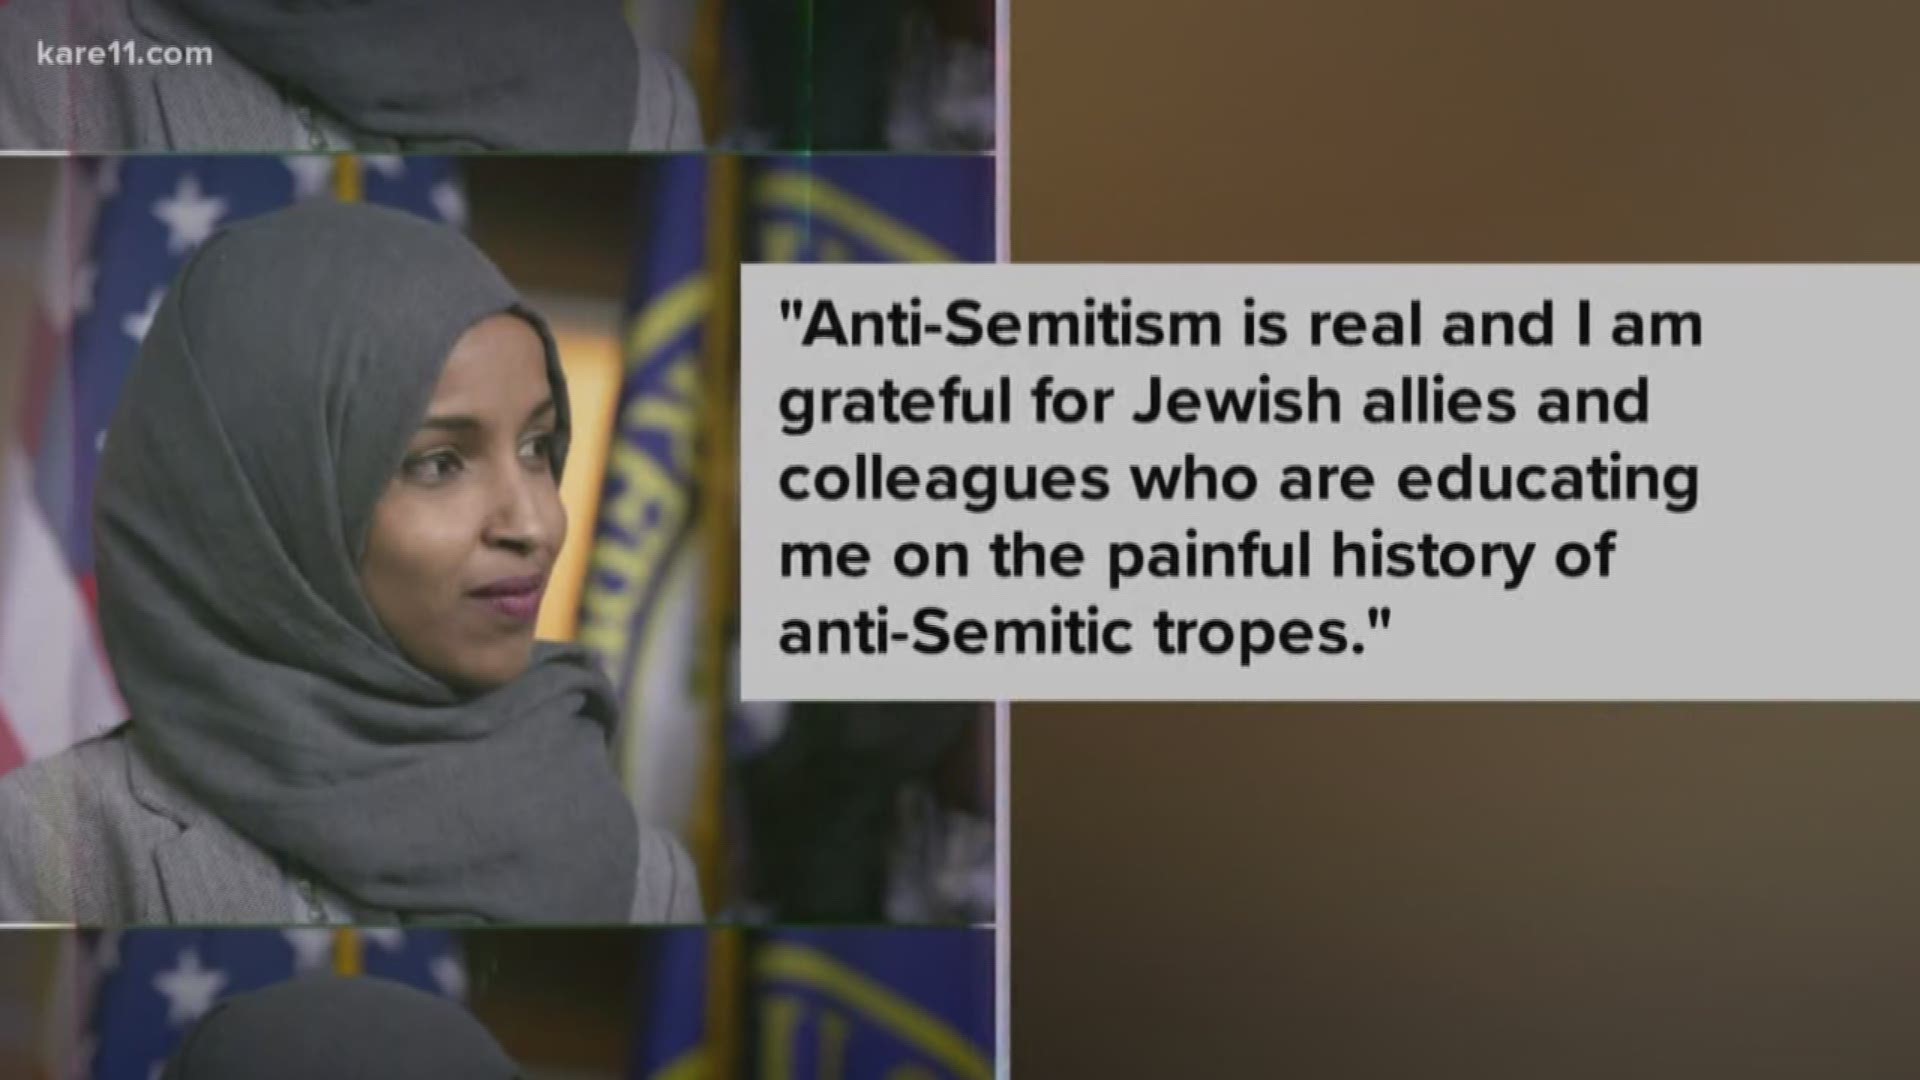 President Trump has called on Rep. Omar to resign over tweets interpreted by many as anti-Semitic, but some Democrats are pointing to GOP hypocrisy on the issue.